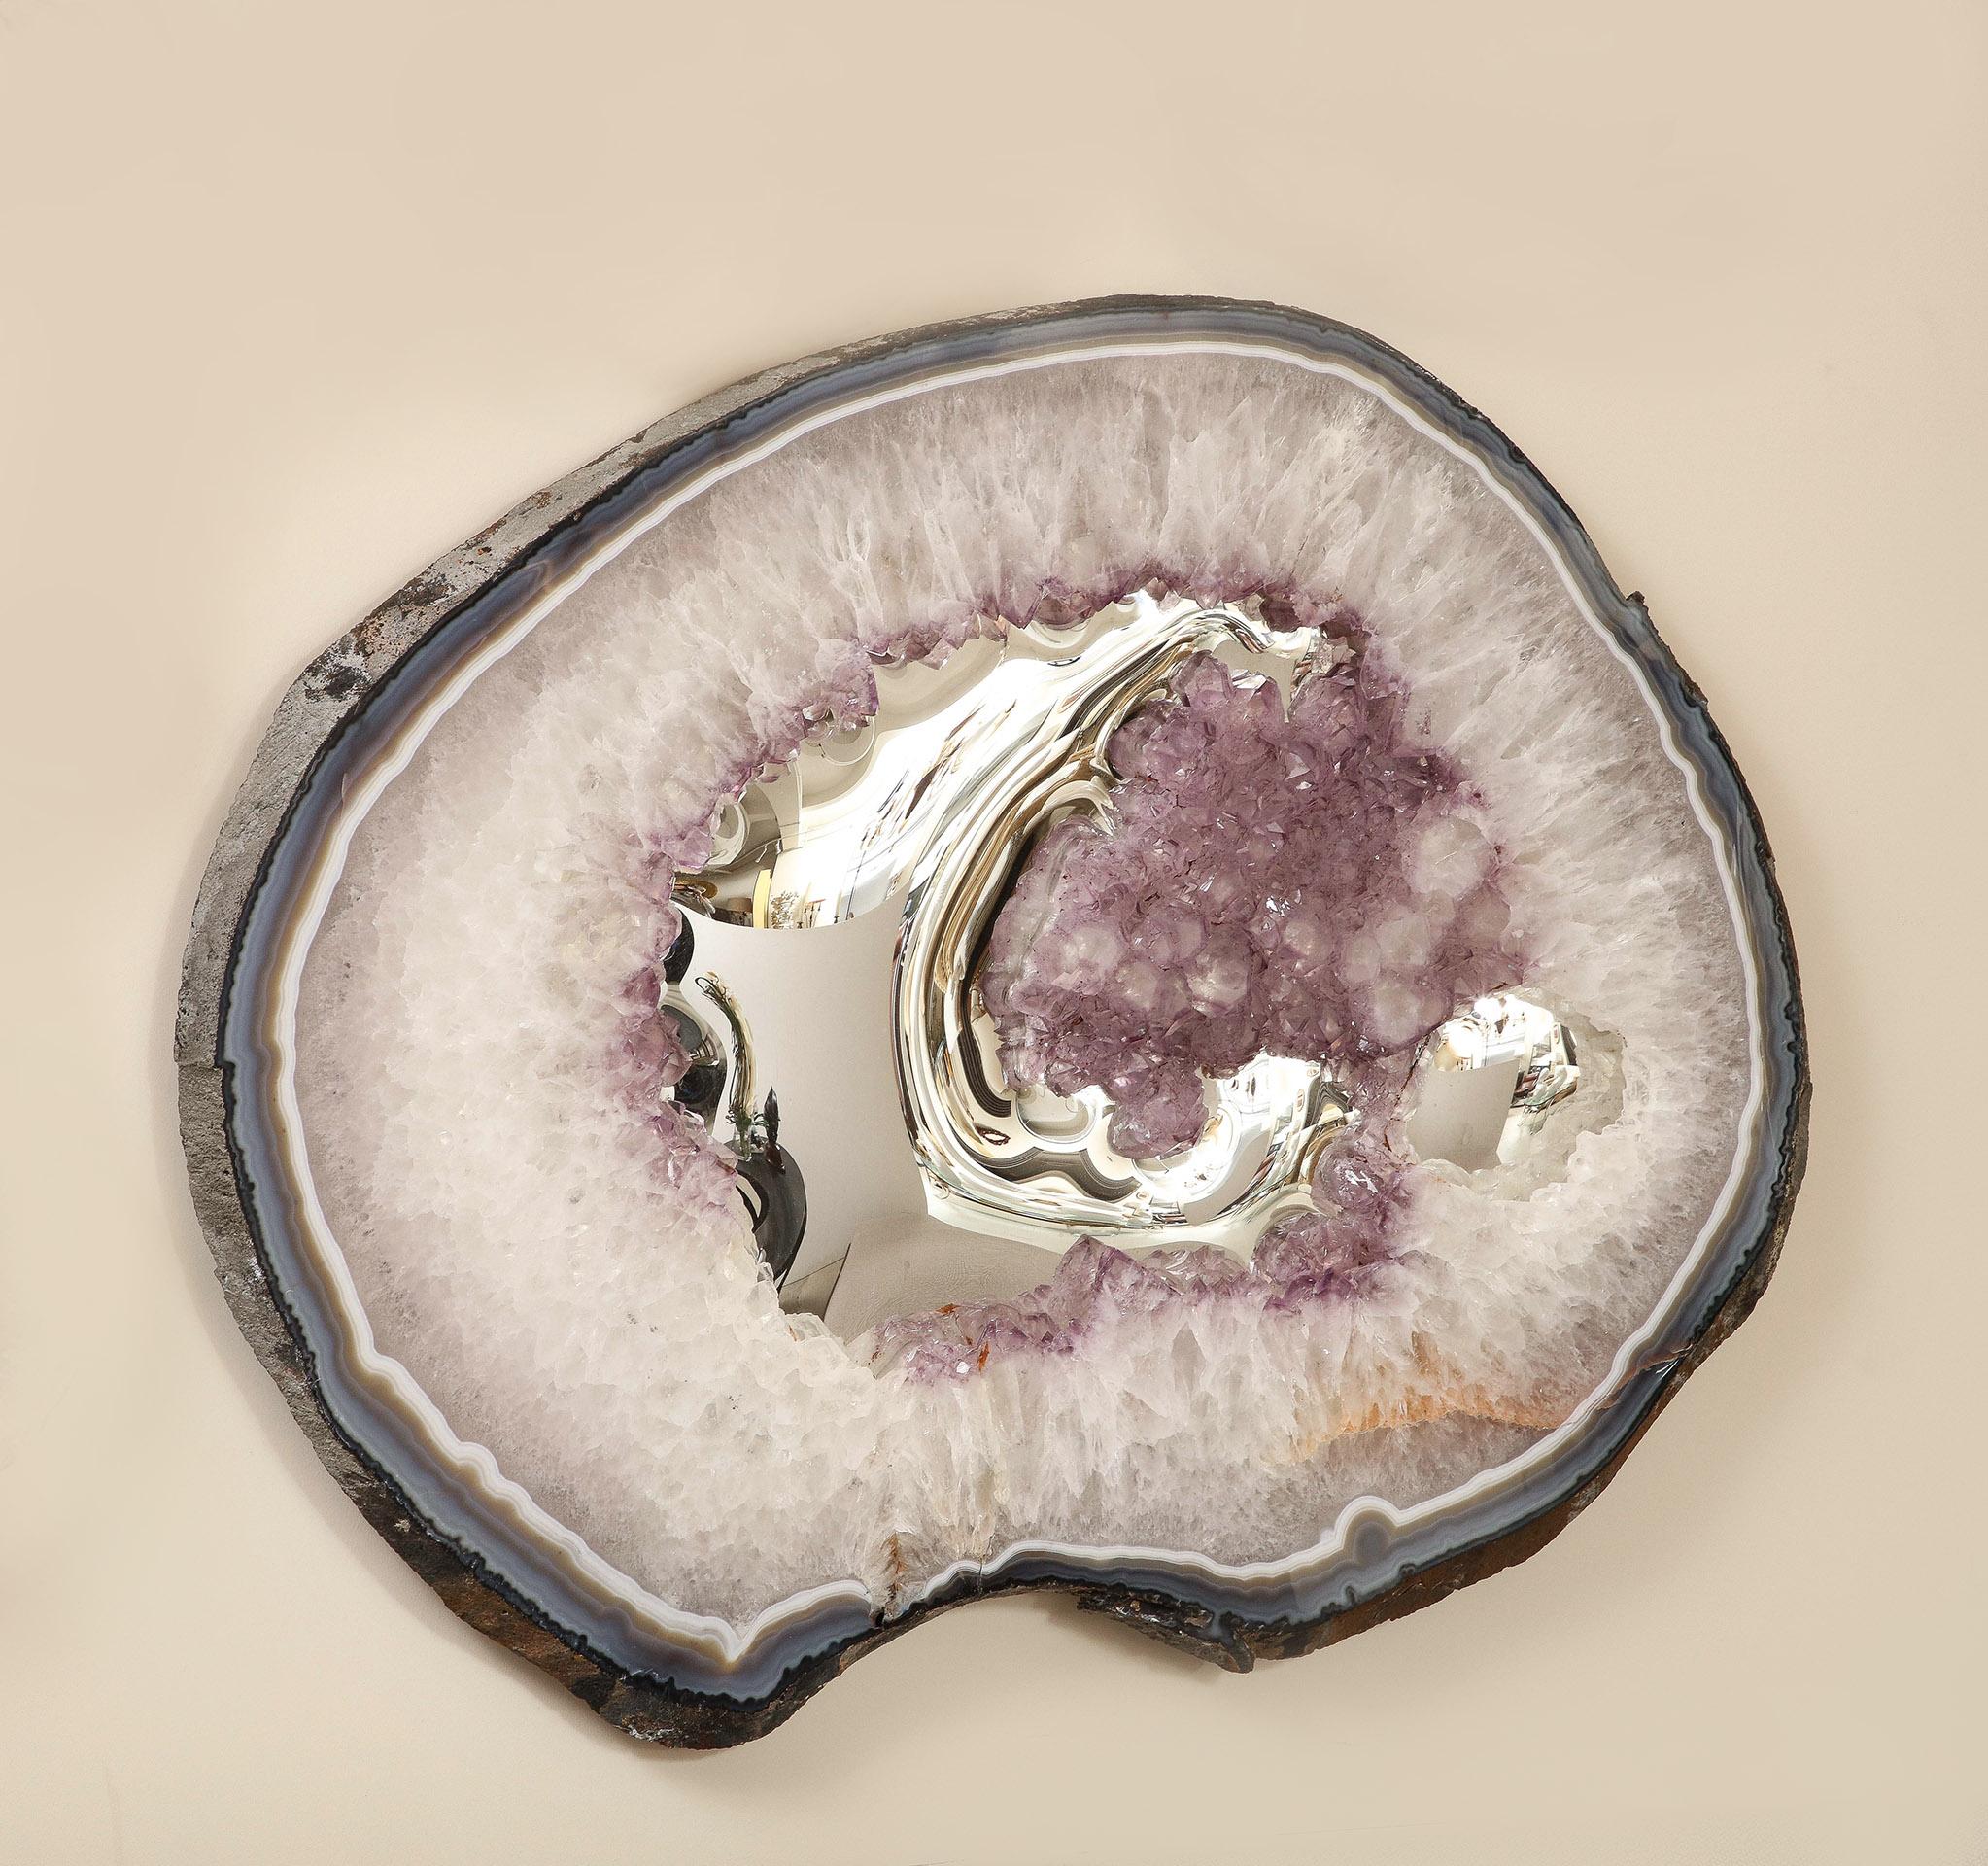 The Agate 